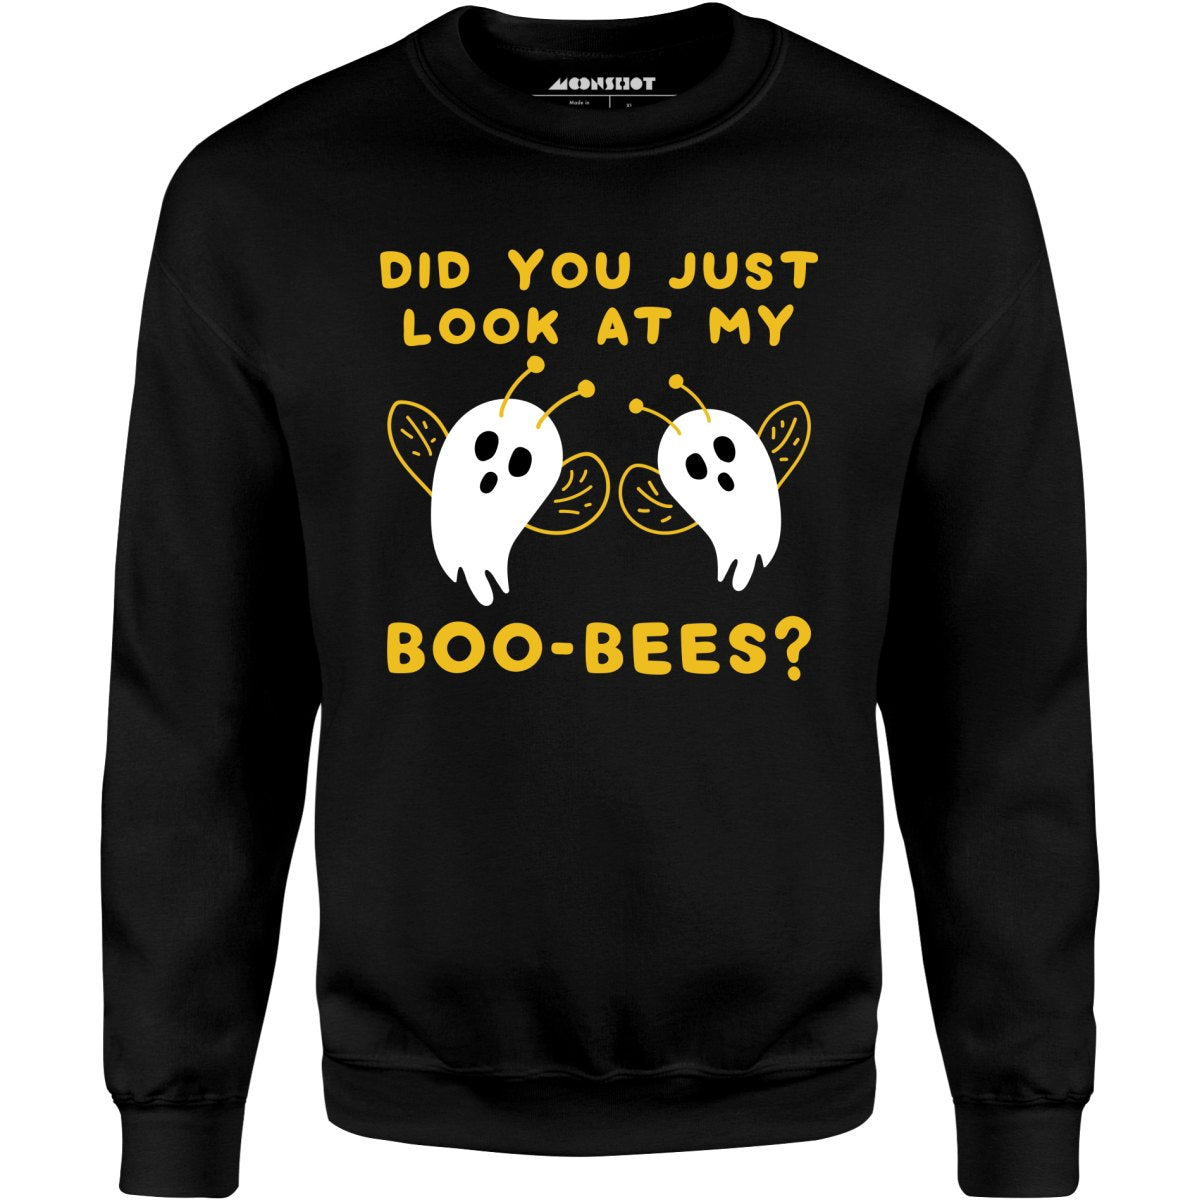 Did You Just Look At My Boo-Bees? - Unisex Sweatshirt